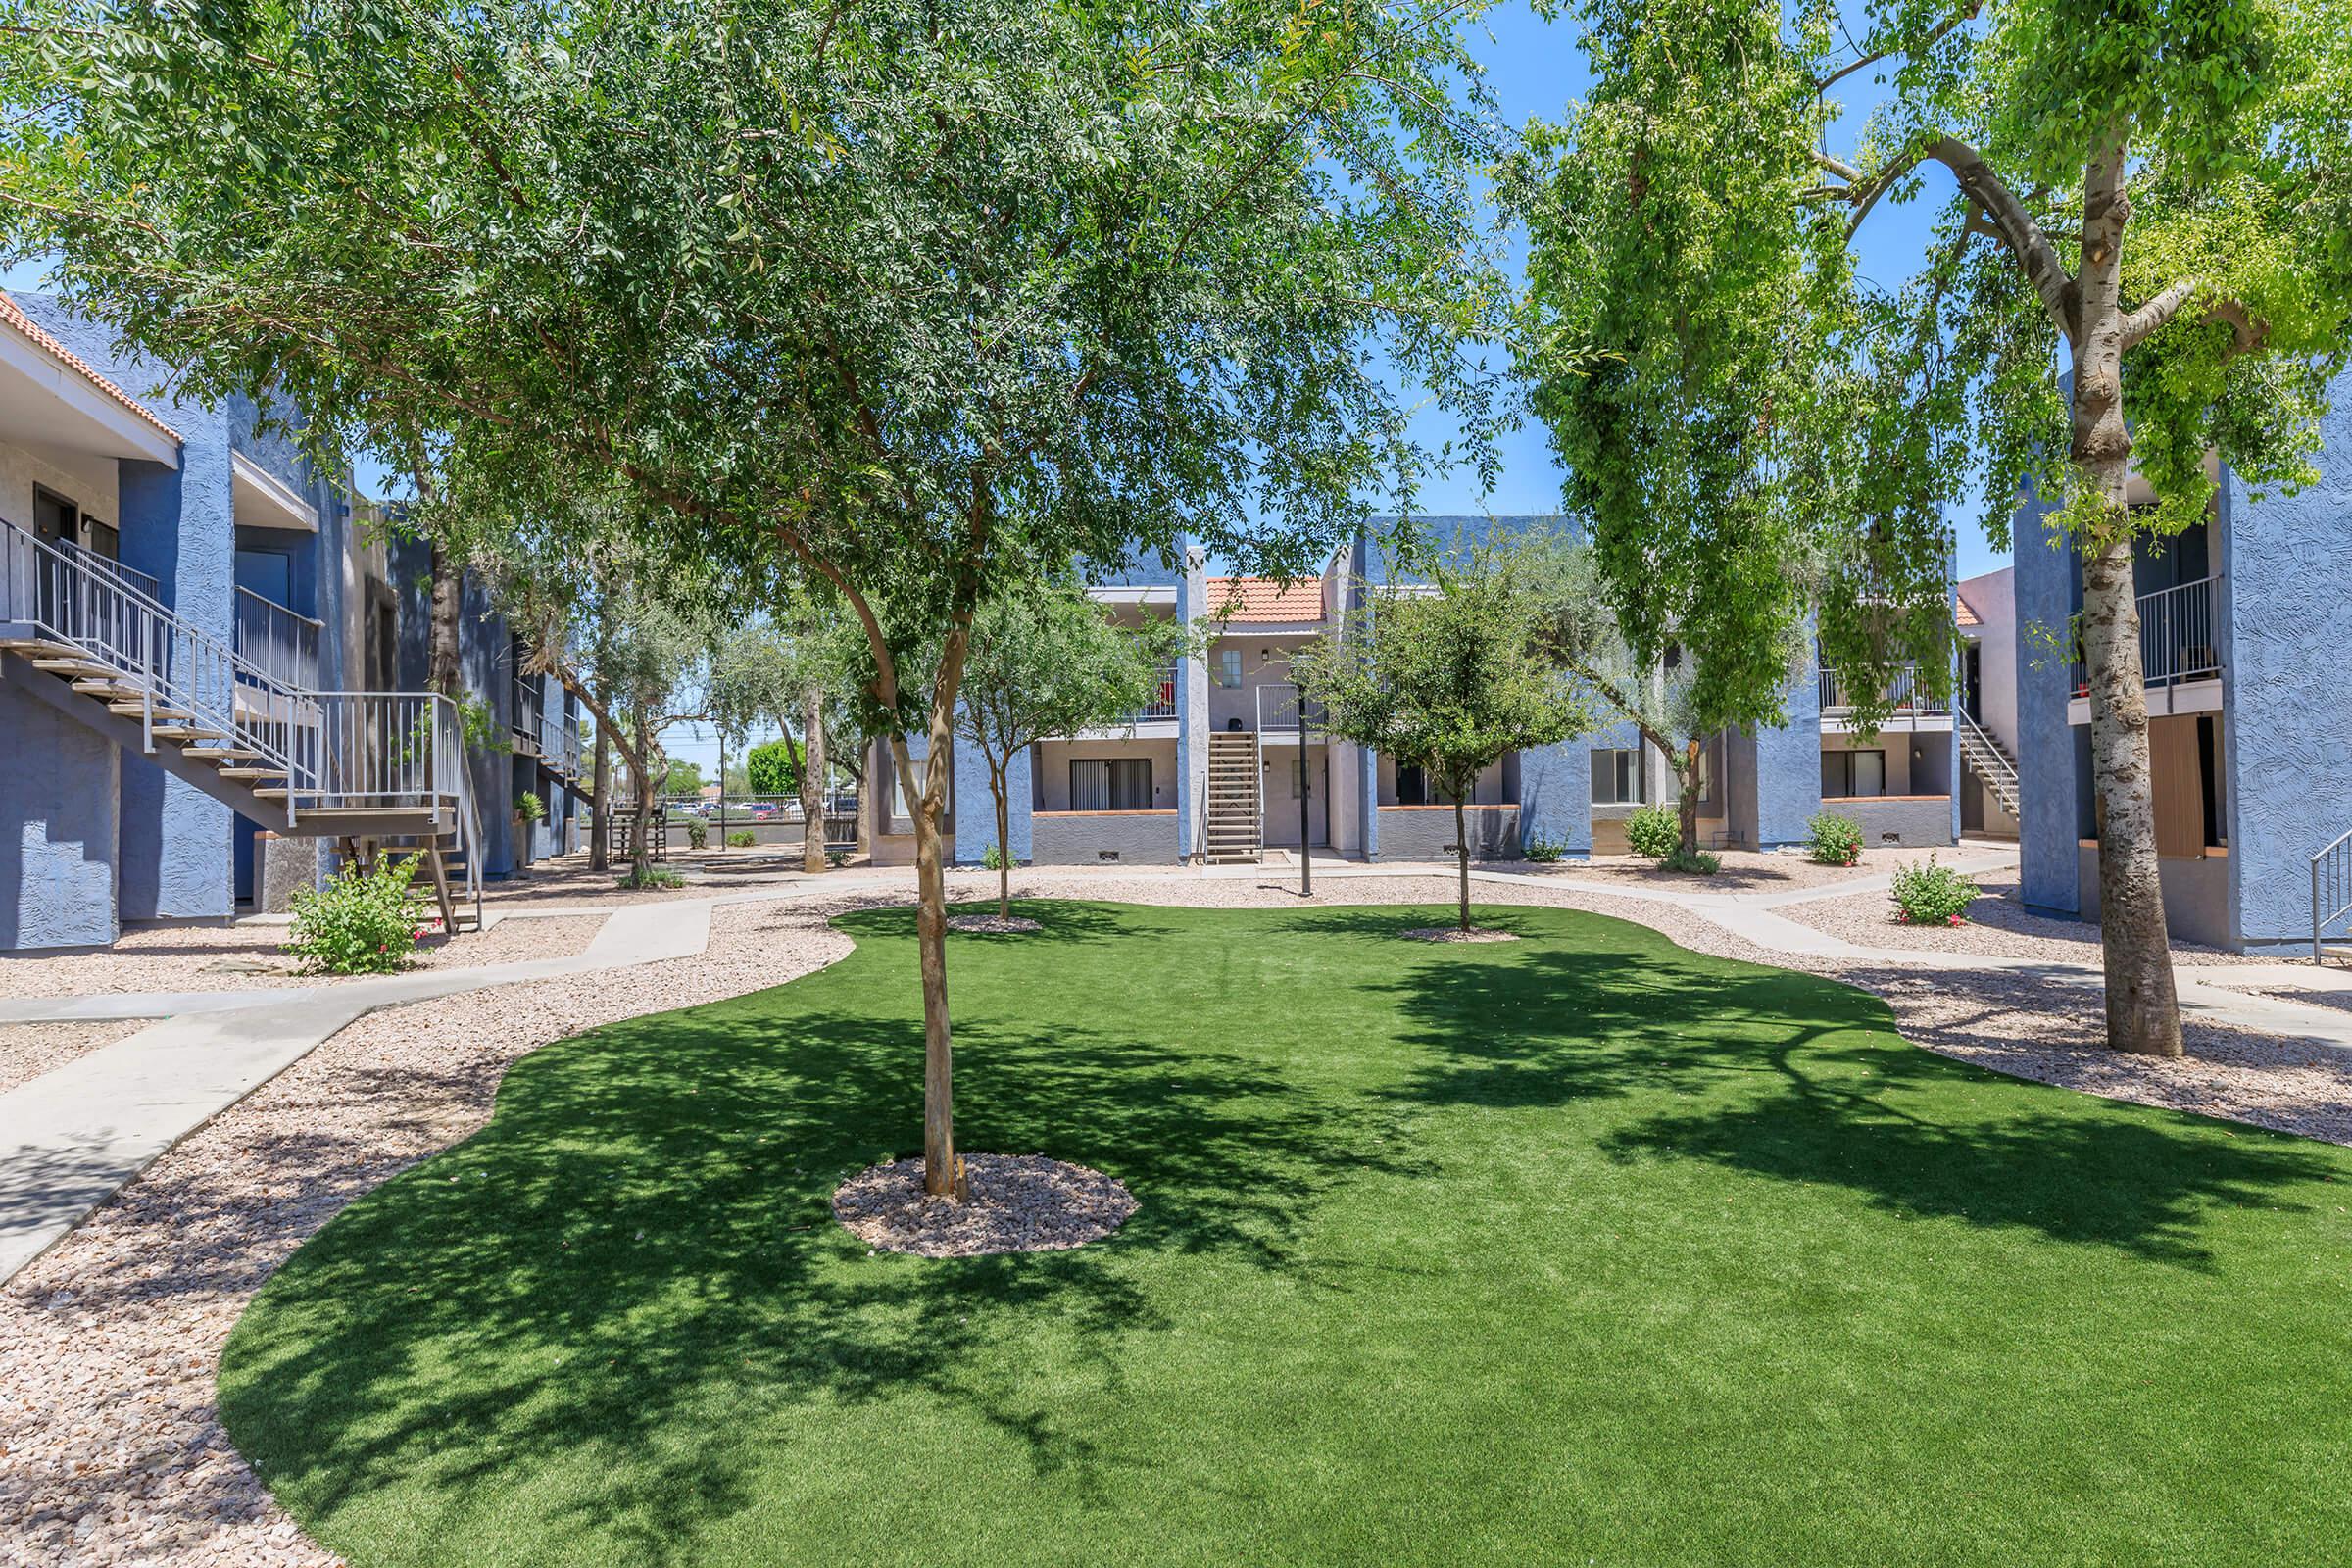 West Phoenix apartment grass courtyard with trees and shade in front of the building